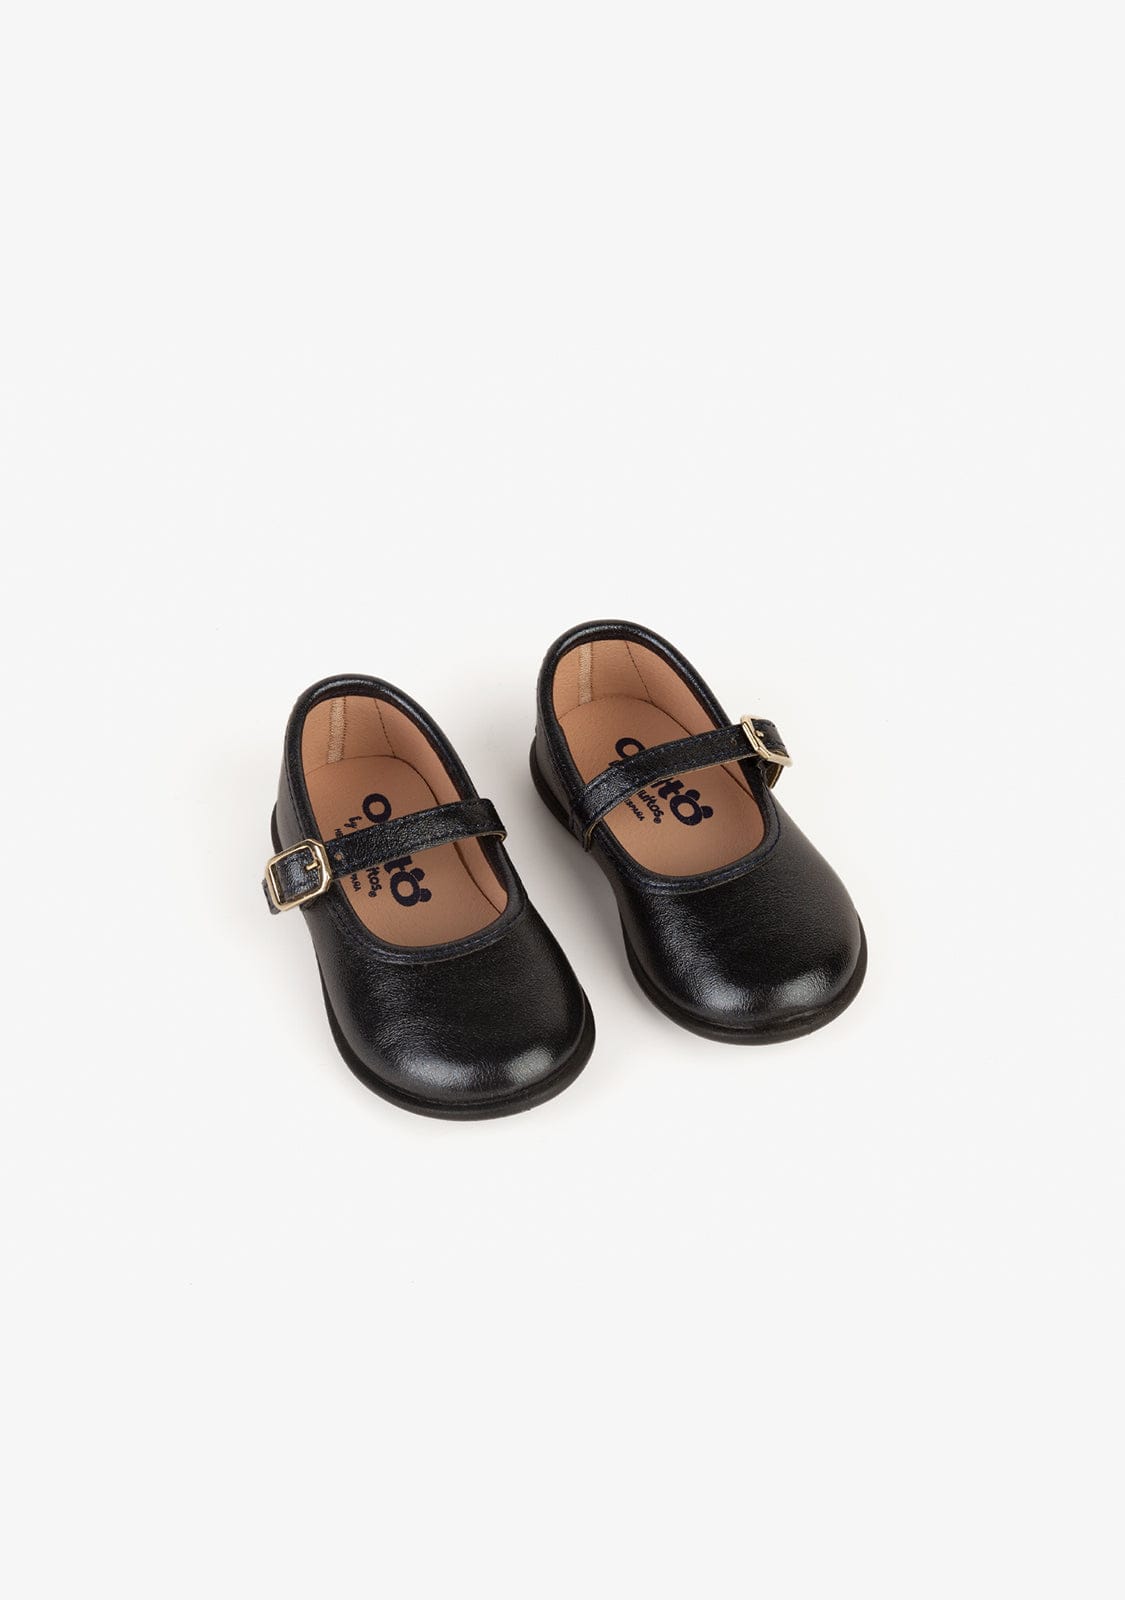 OSITO Shoes Baby's Navy Metallized Mary Janes